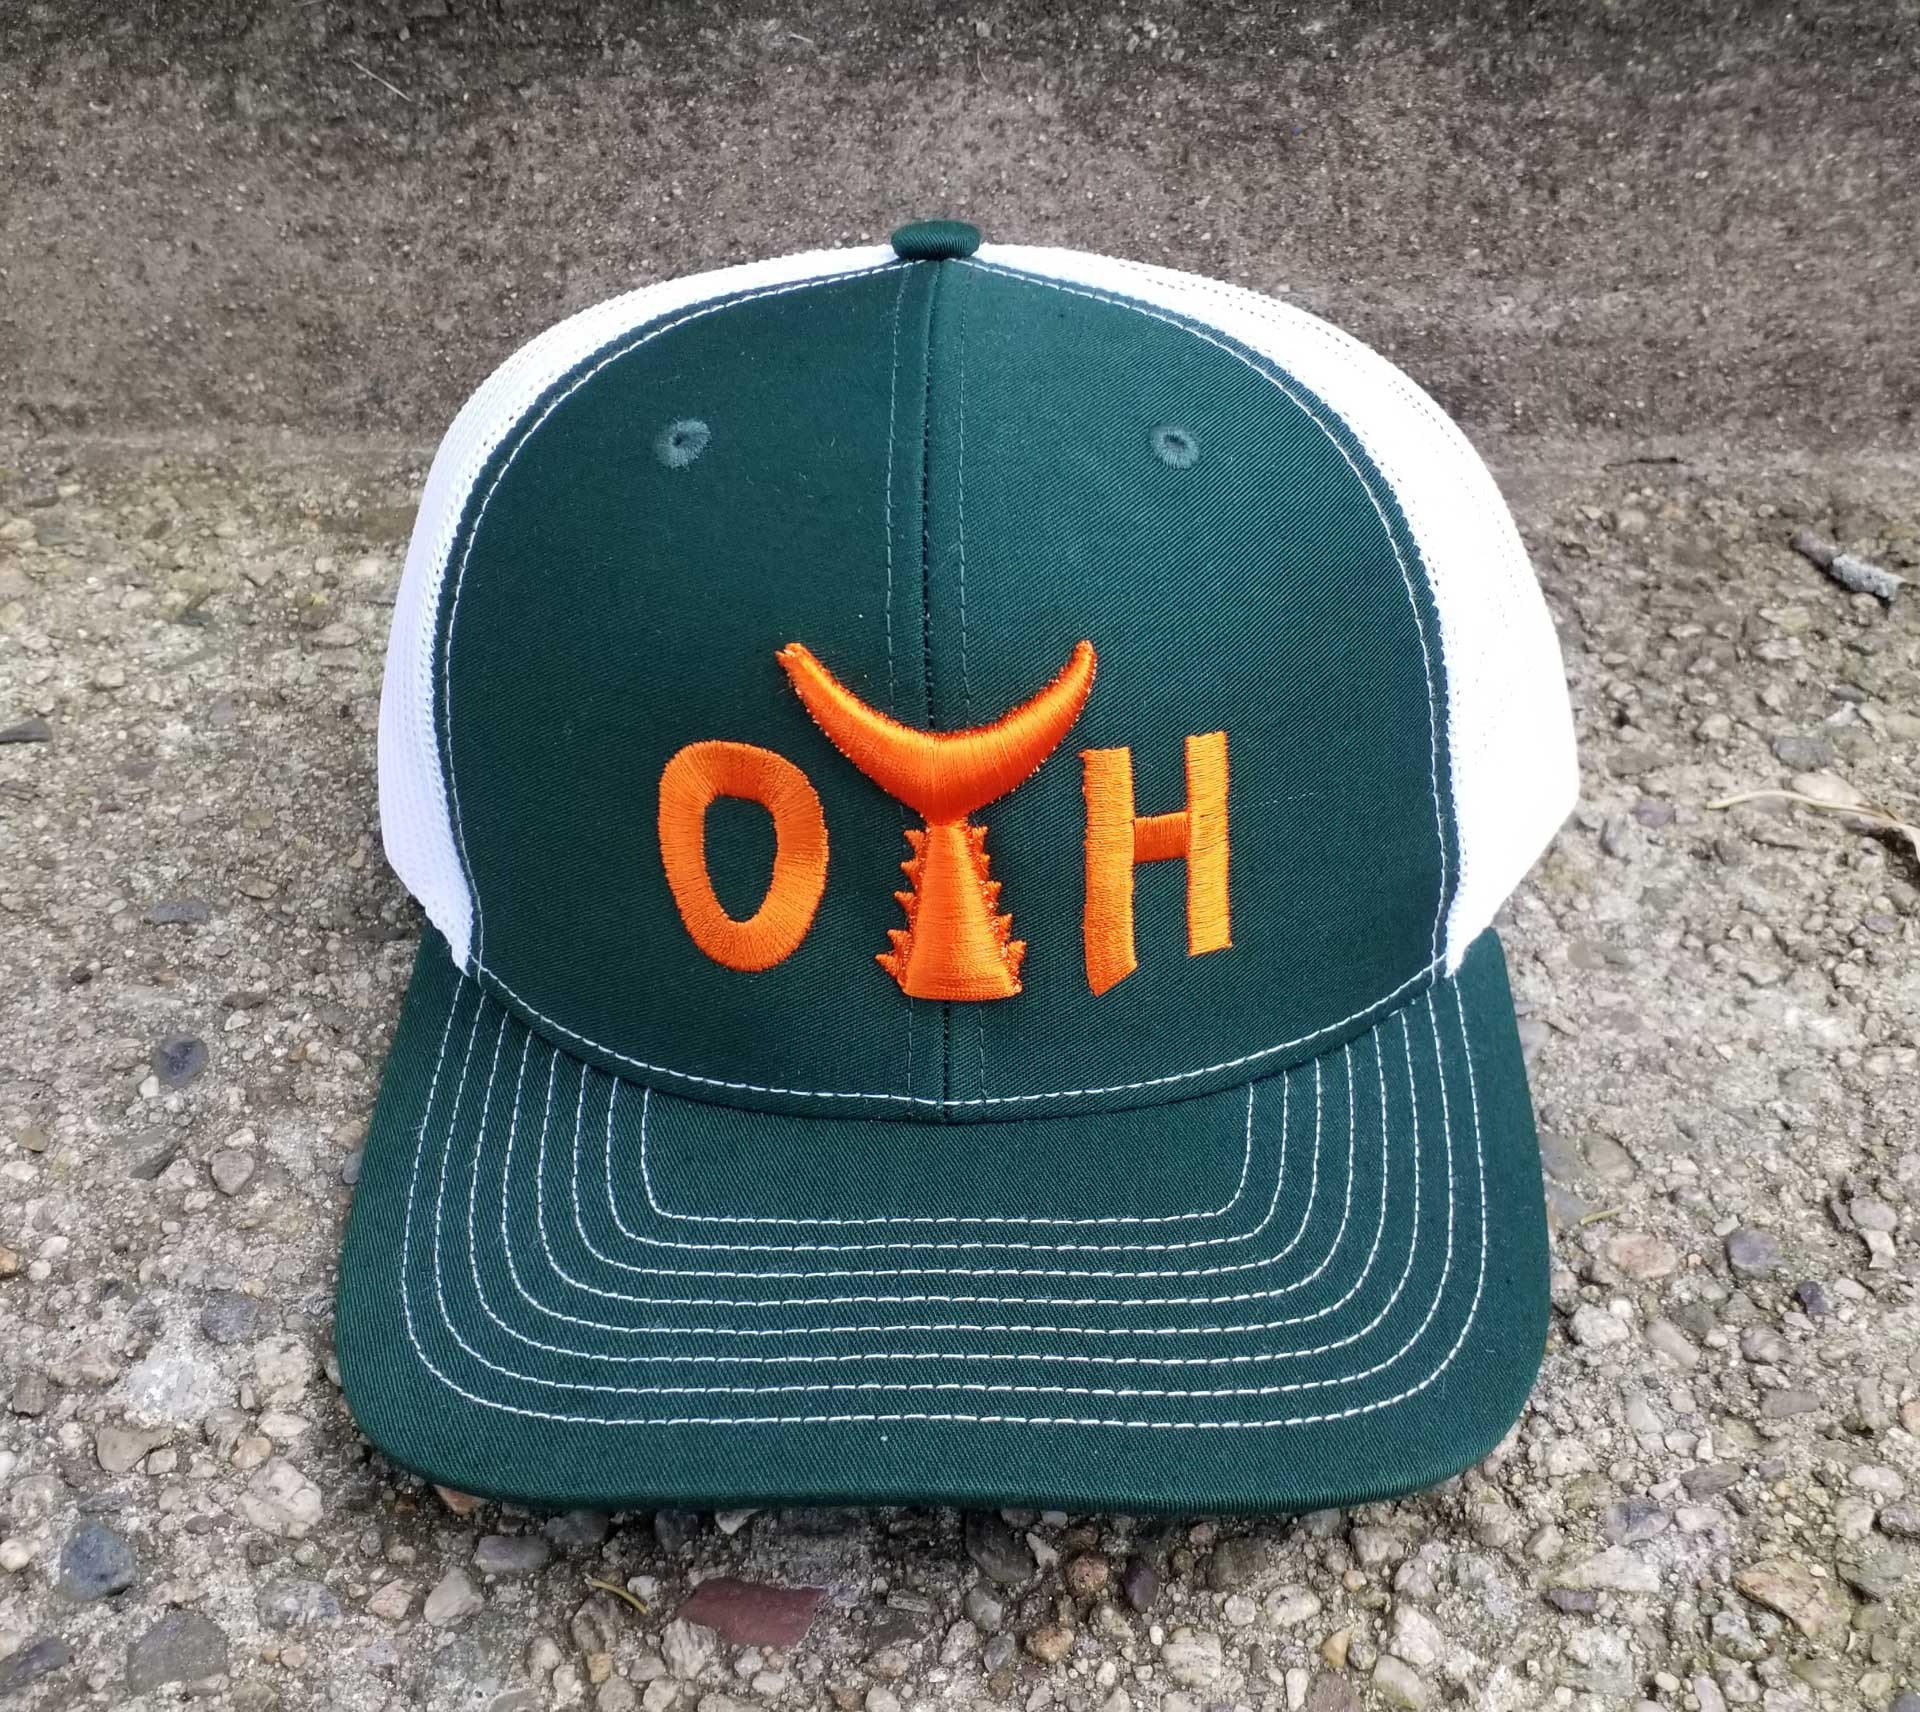 O.T.H. Adjustable Forest Green and Orange Trucker Hat